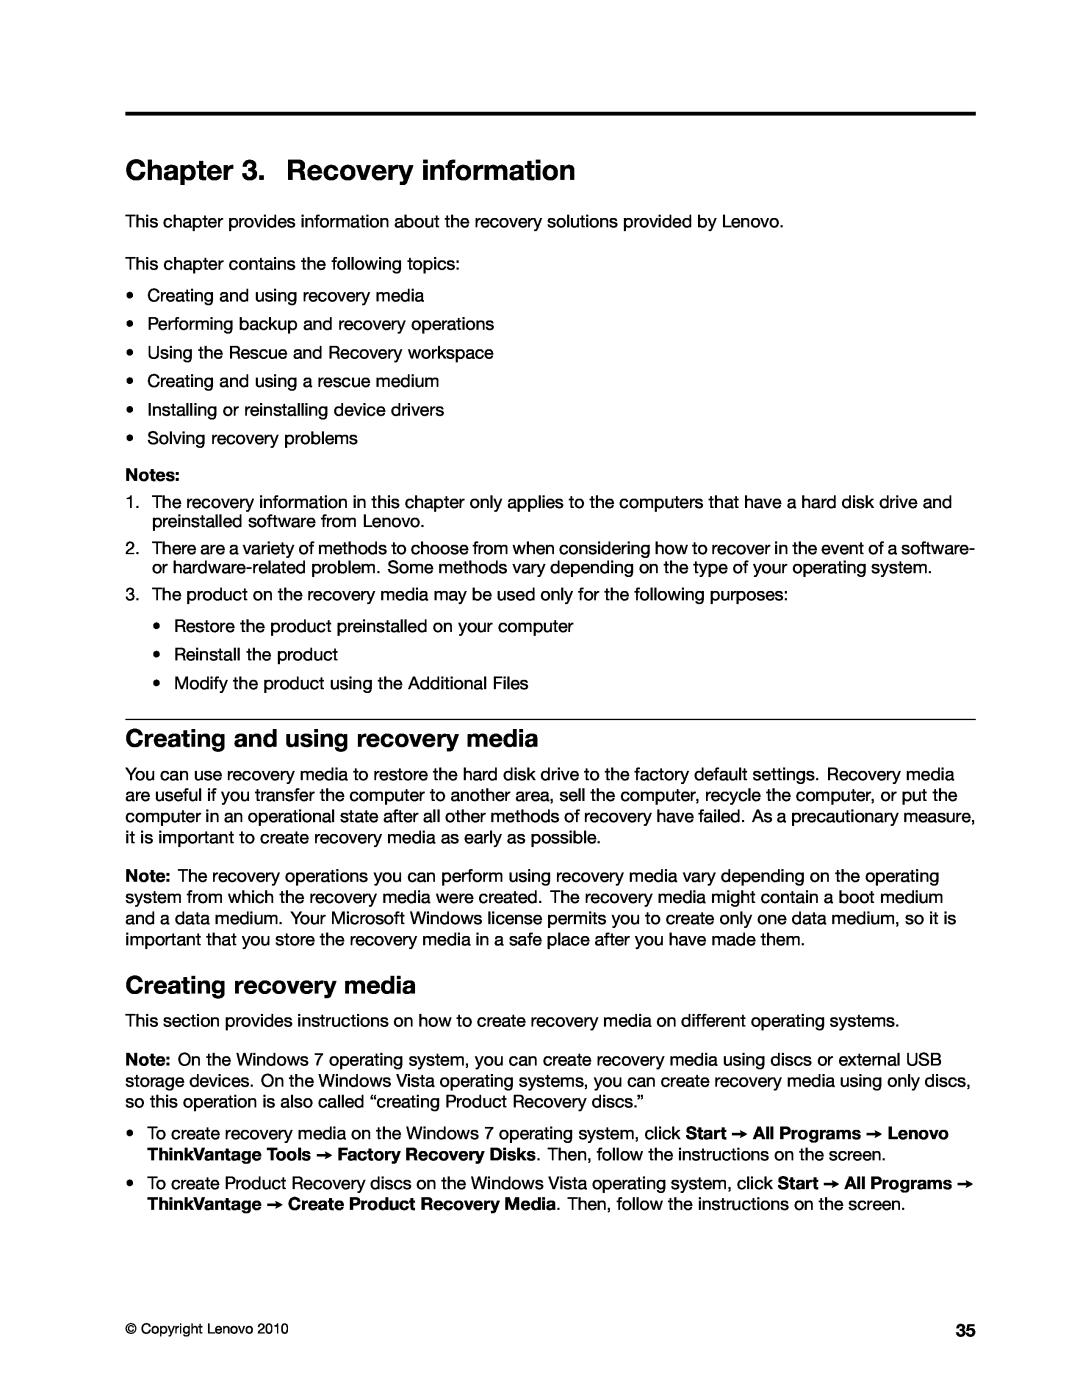 Lenovo 3137, 3026, 3269, 3039, 5548, 5536 Recovery information, Creating and using recovery media, Creating recovery media 